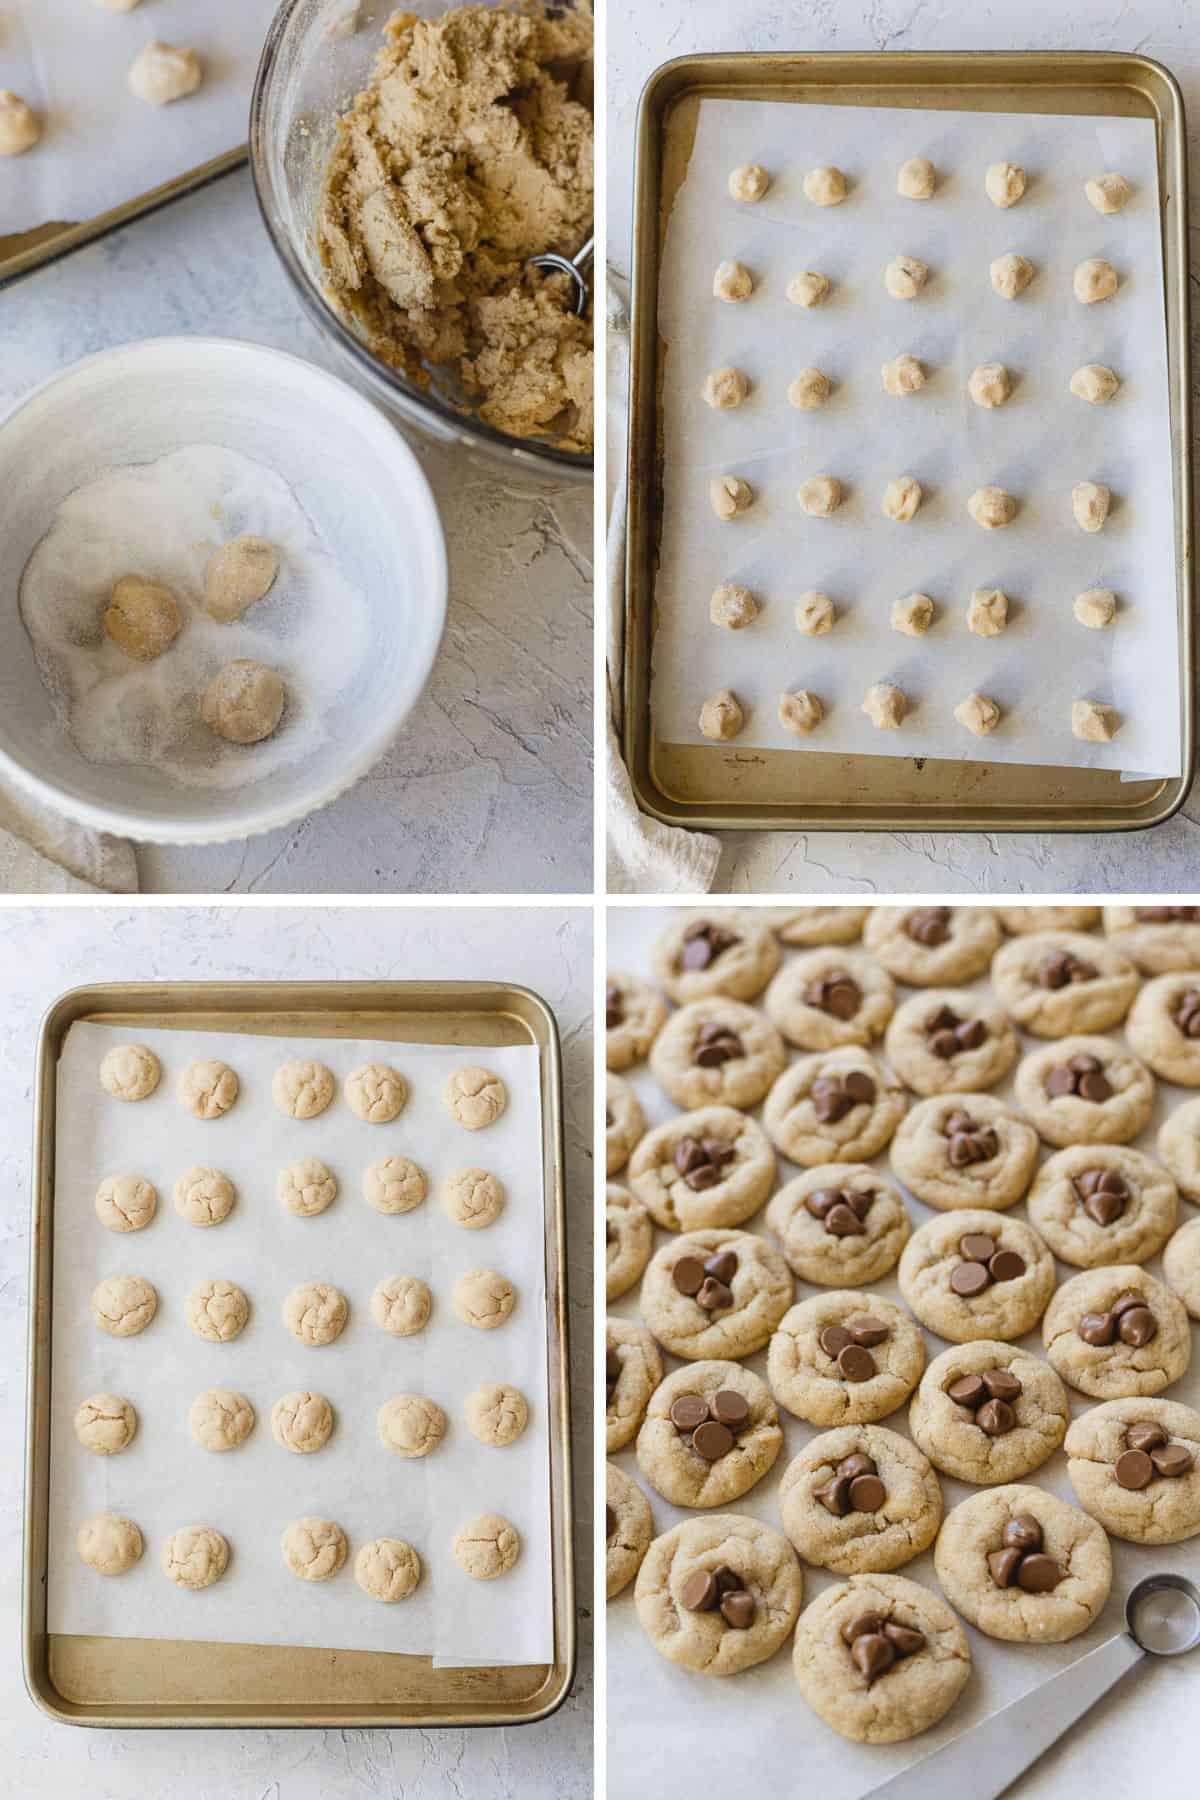 Step by step of mini peanut butter blossom cookies: rolling the dough in sugar, arranging on baking sheet, baked cookies, and baked cookies with chocolate chips in centers.